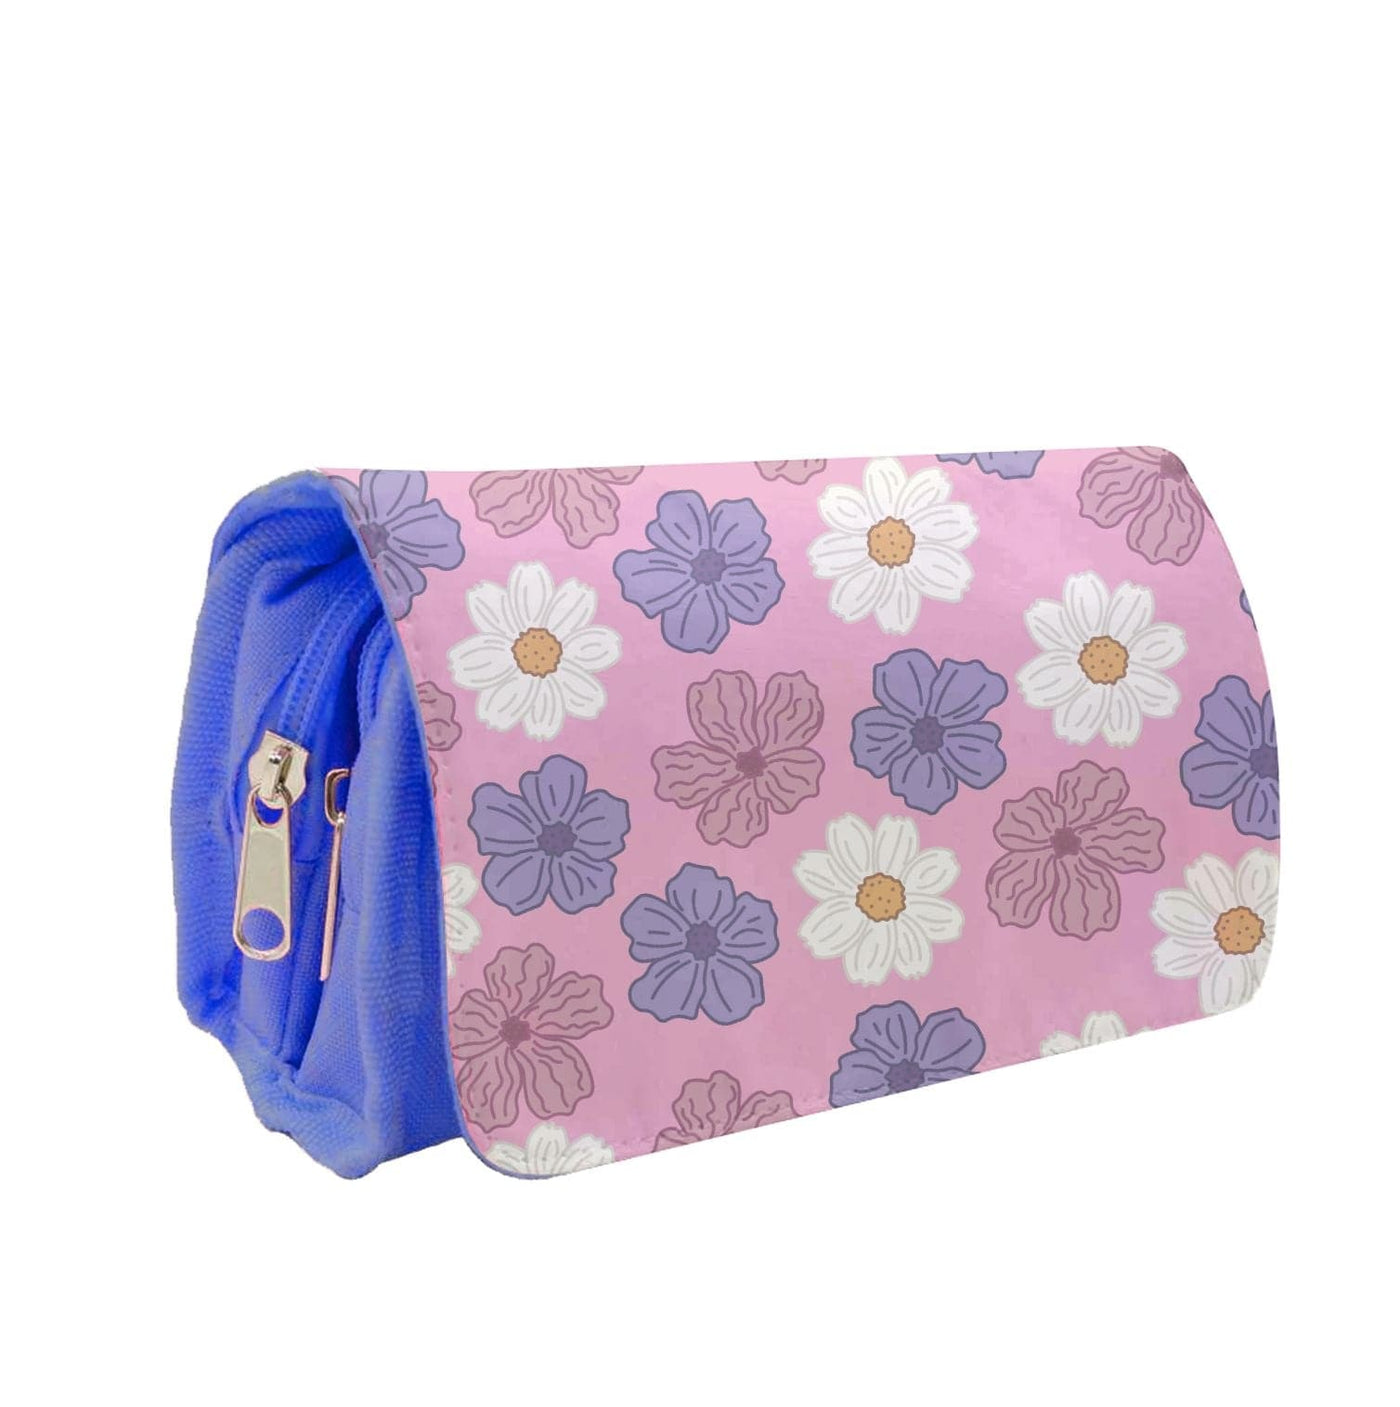 Pink, Purple And White Flowers - Floral Patterns Pencil Case